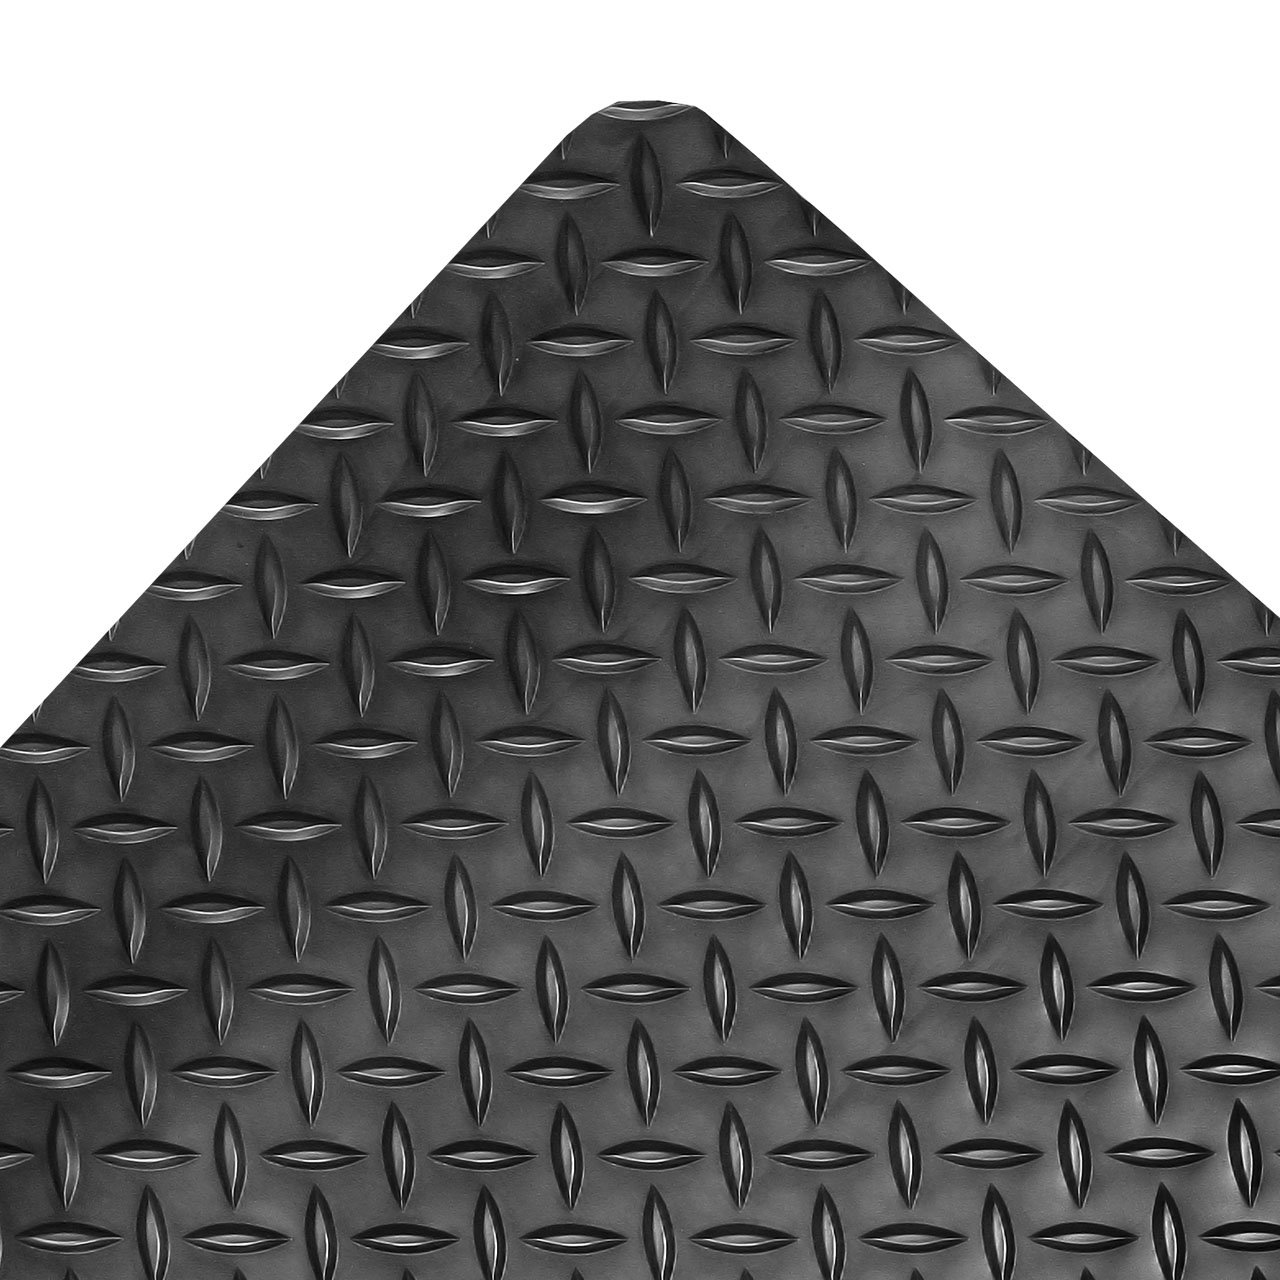 No Trax Notrax - 979S0035Bl Notrax Vinyl 979 Saddle Trax Grande Anti-Fatigue Mat, For Dry Areas, 3 Width X 5 Length X 1 Thickness, Black